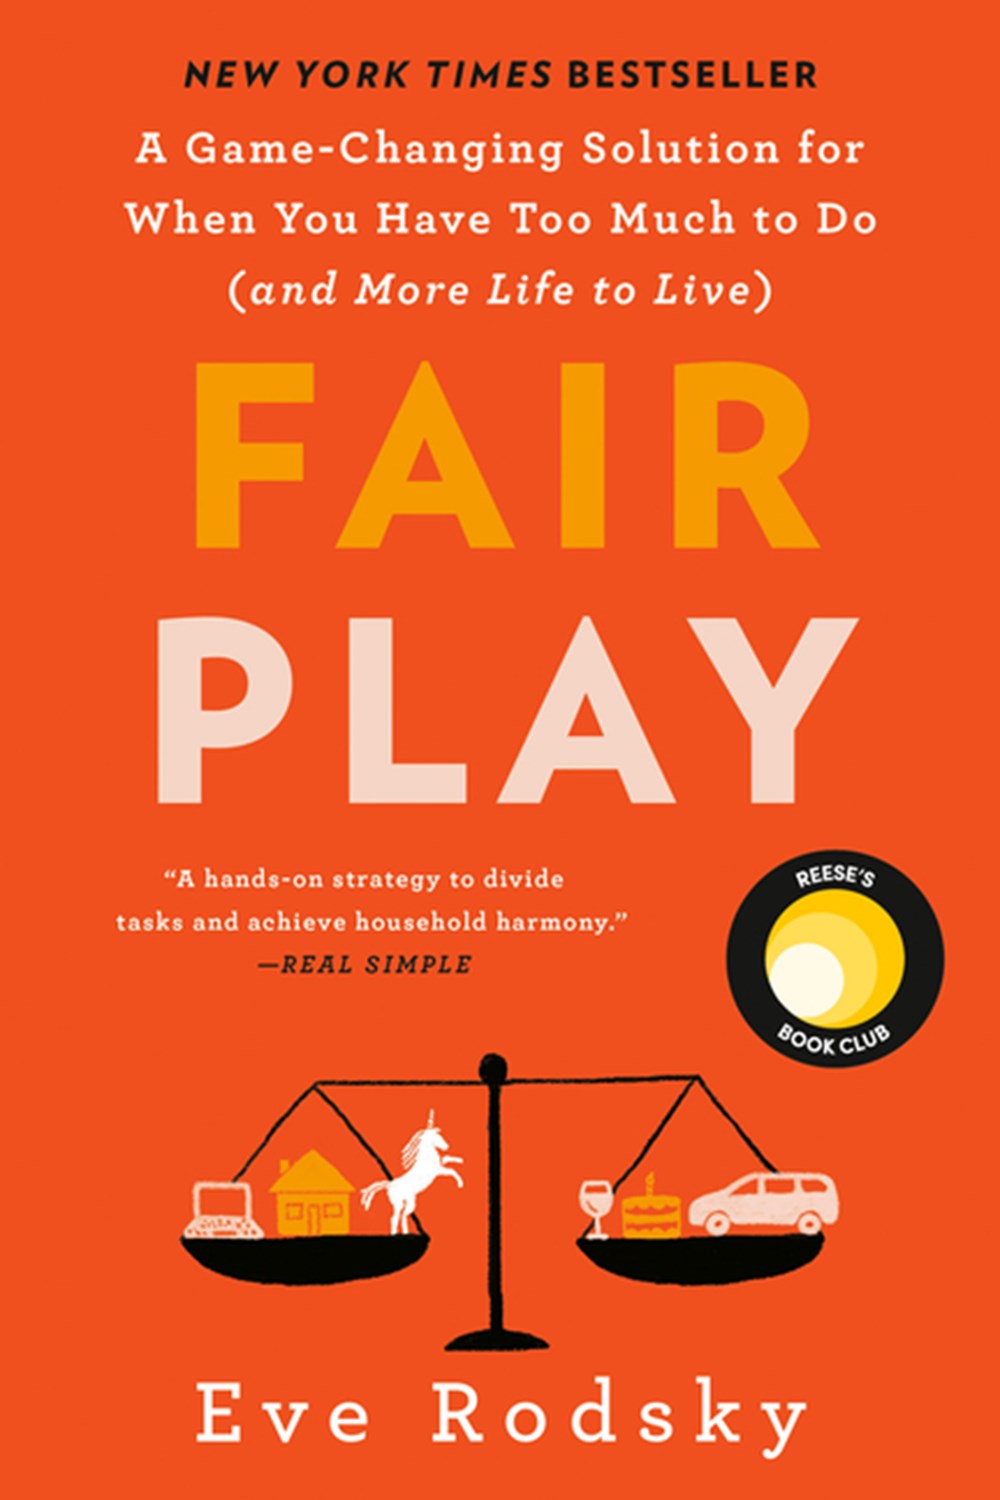 Fair Play: A Game-Changing Solution for When You Have Too Much to Do (and More Life to Live)